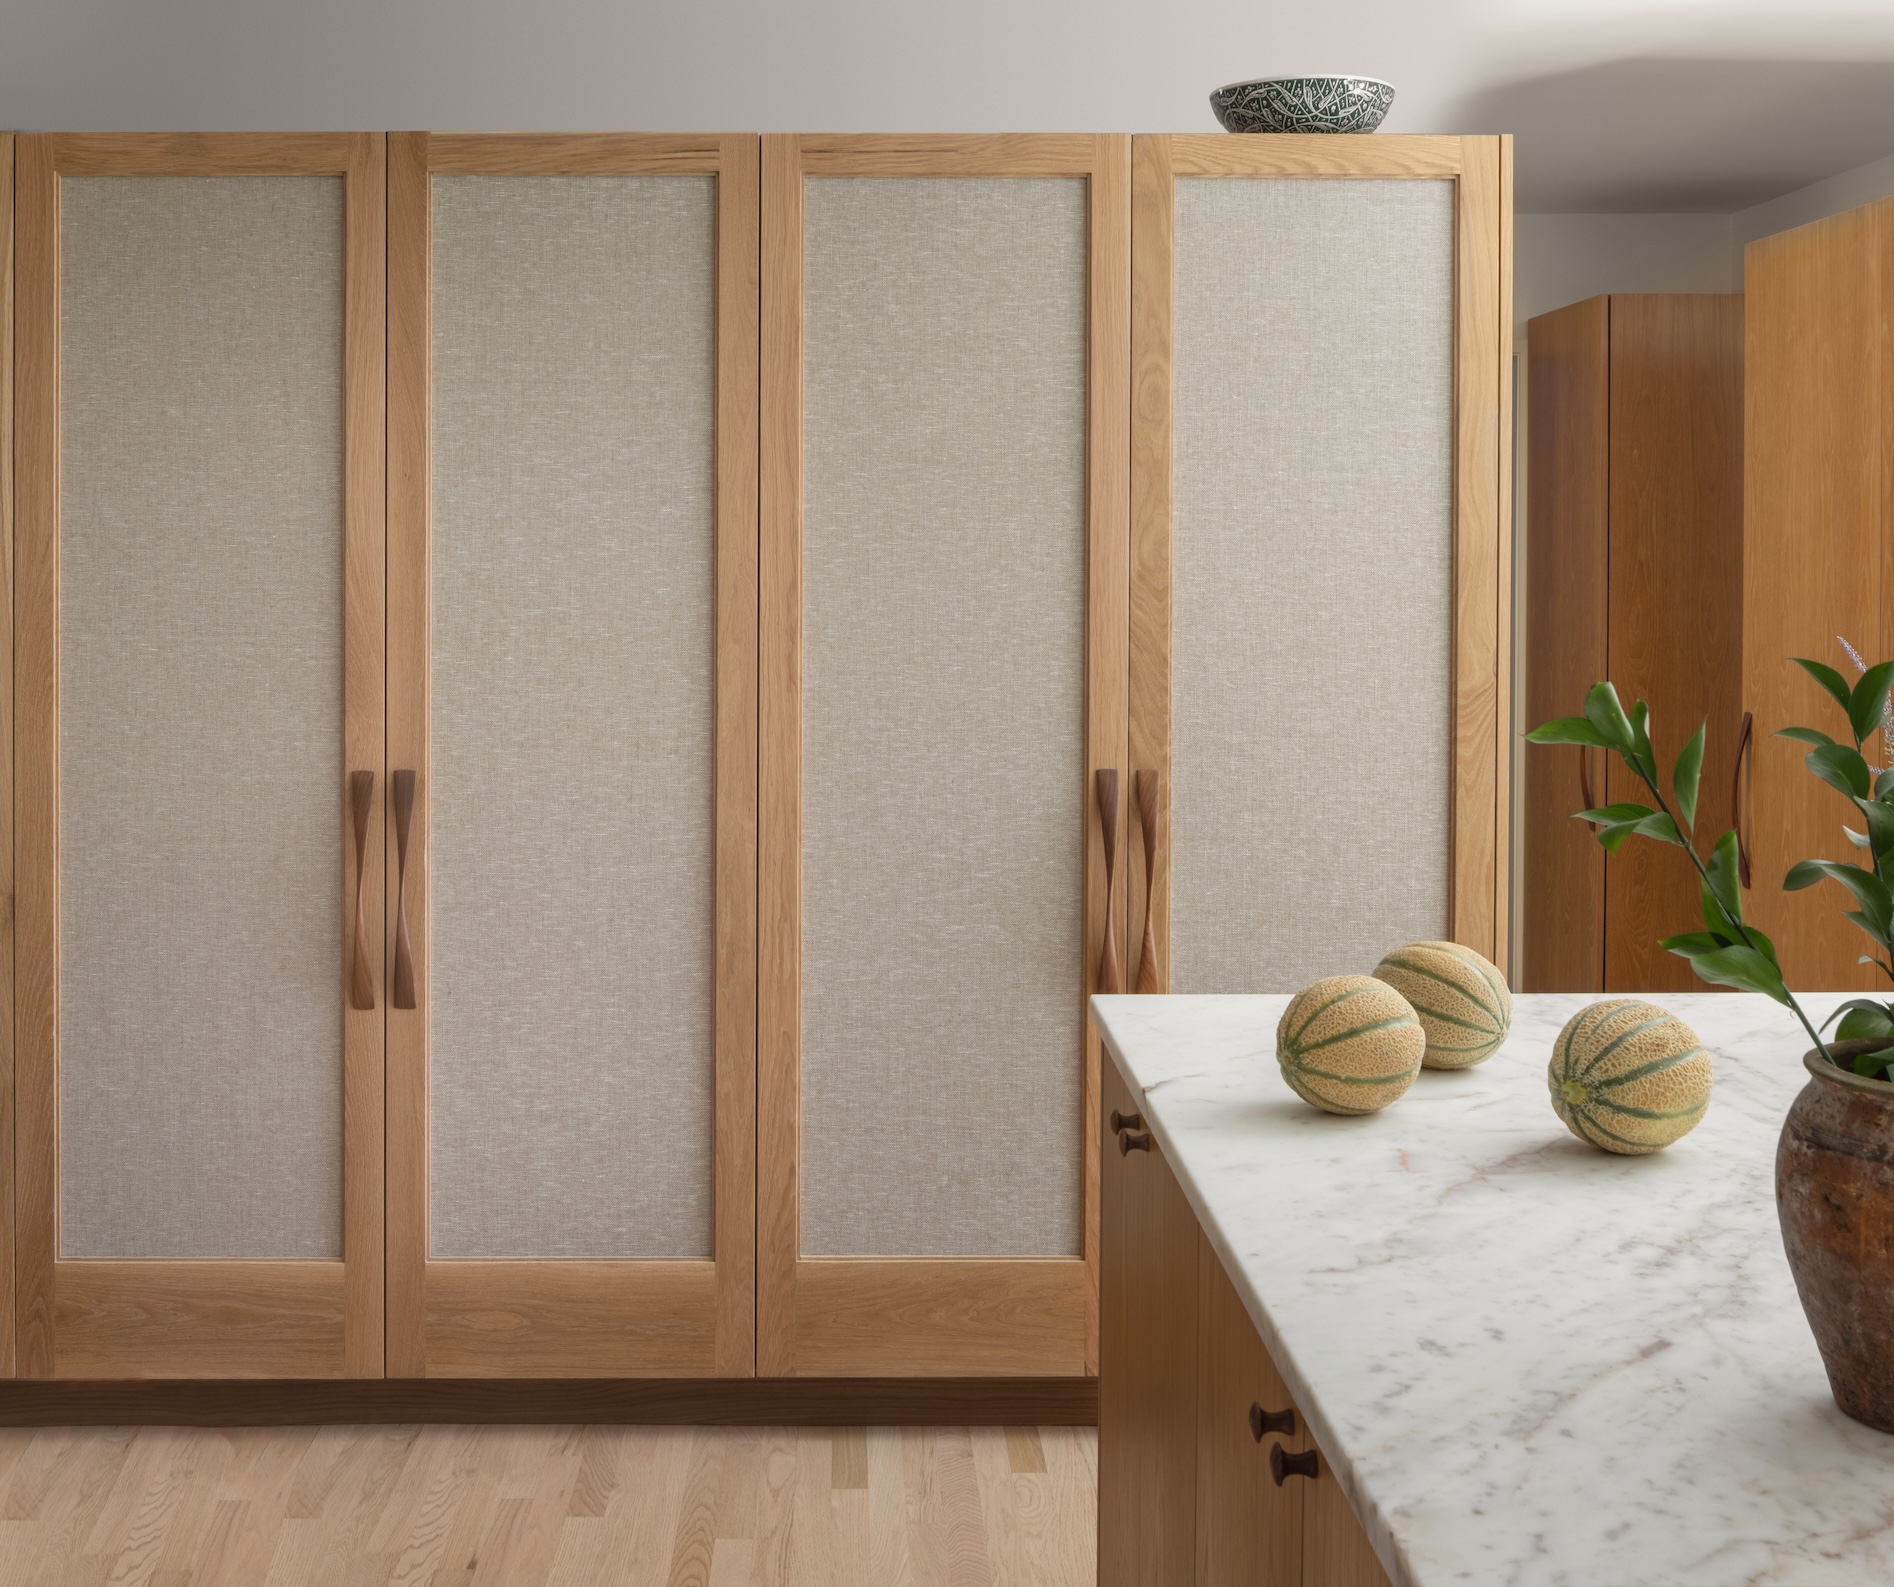 the dining room cabinets are inset with a textured fabric as a way to distingui 20